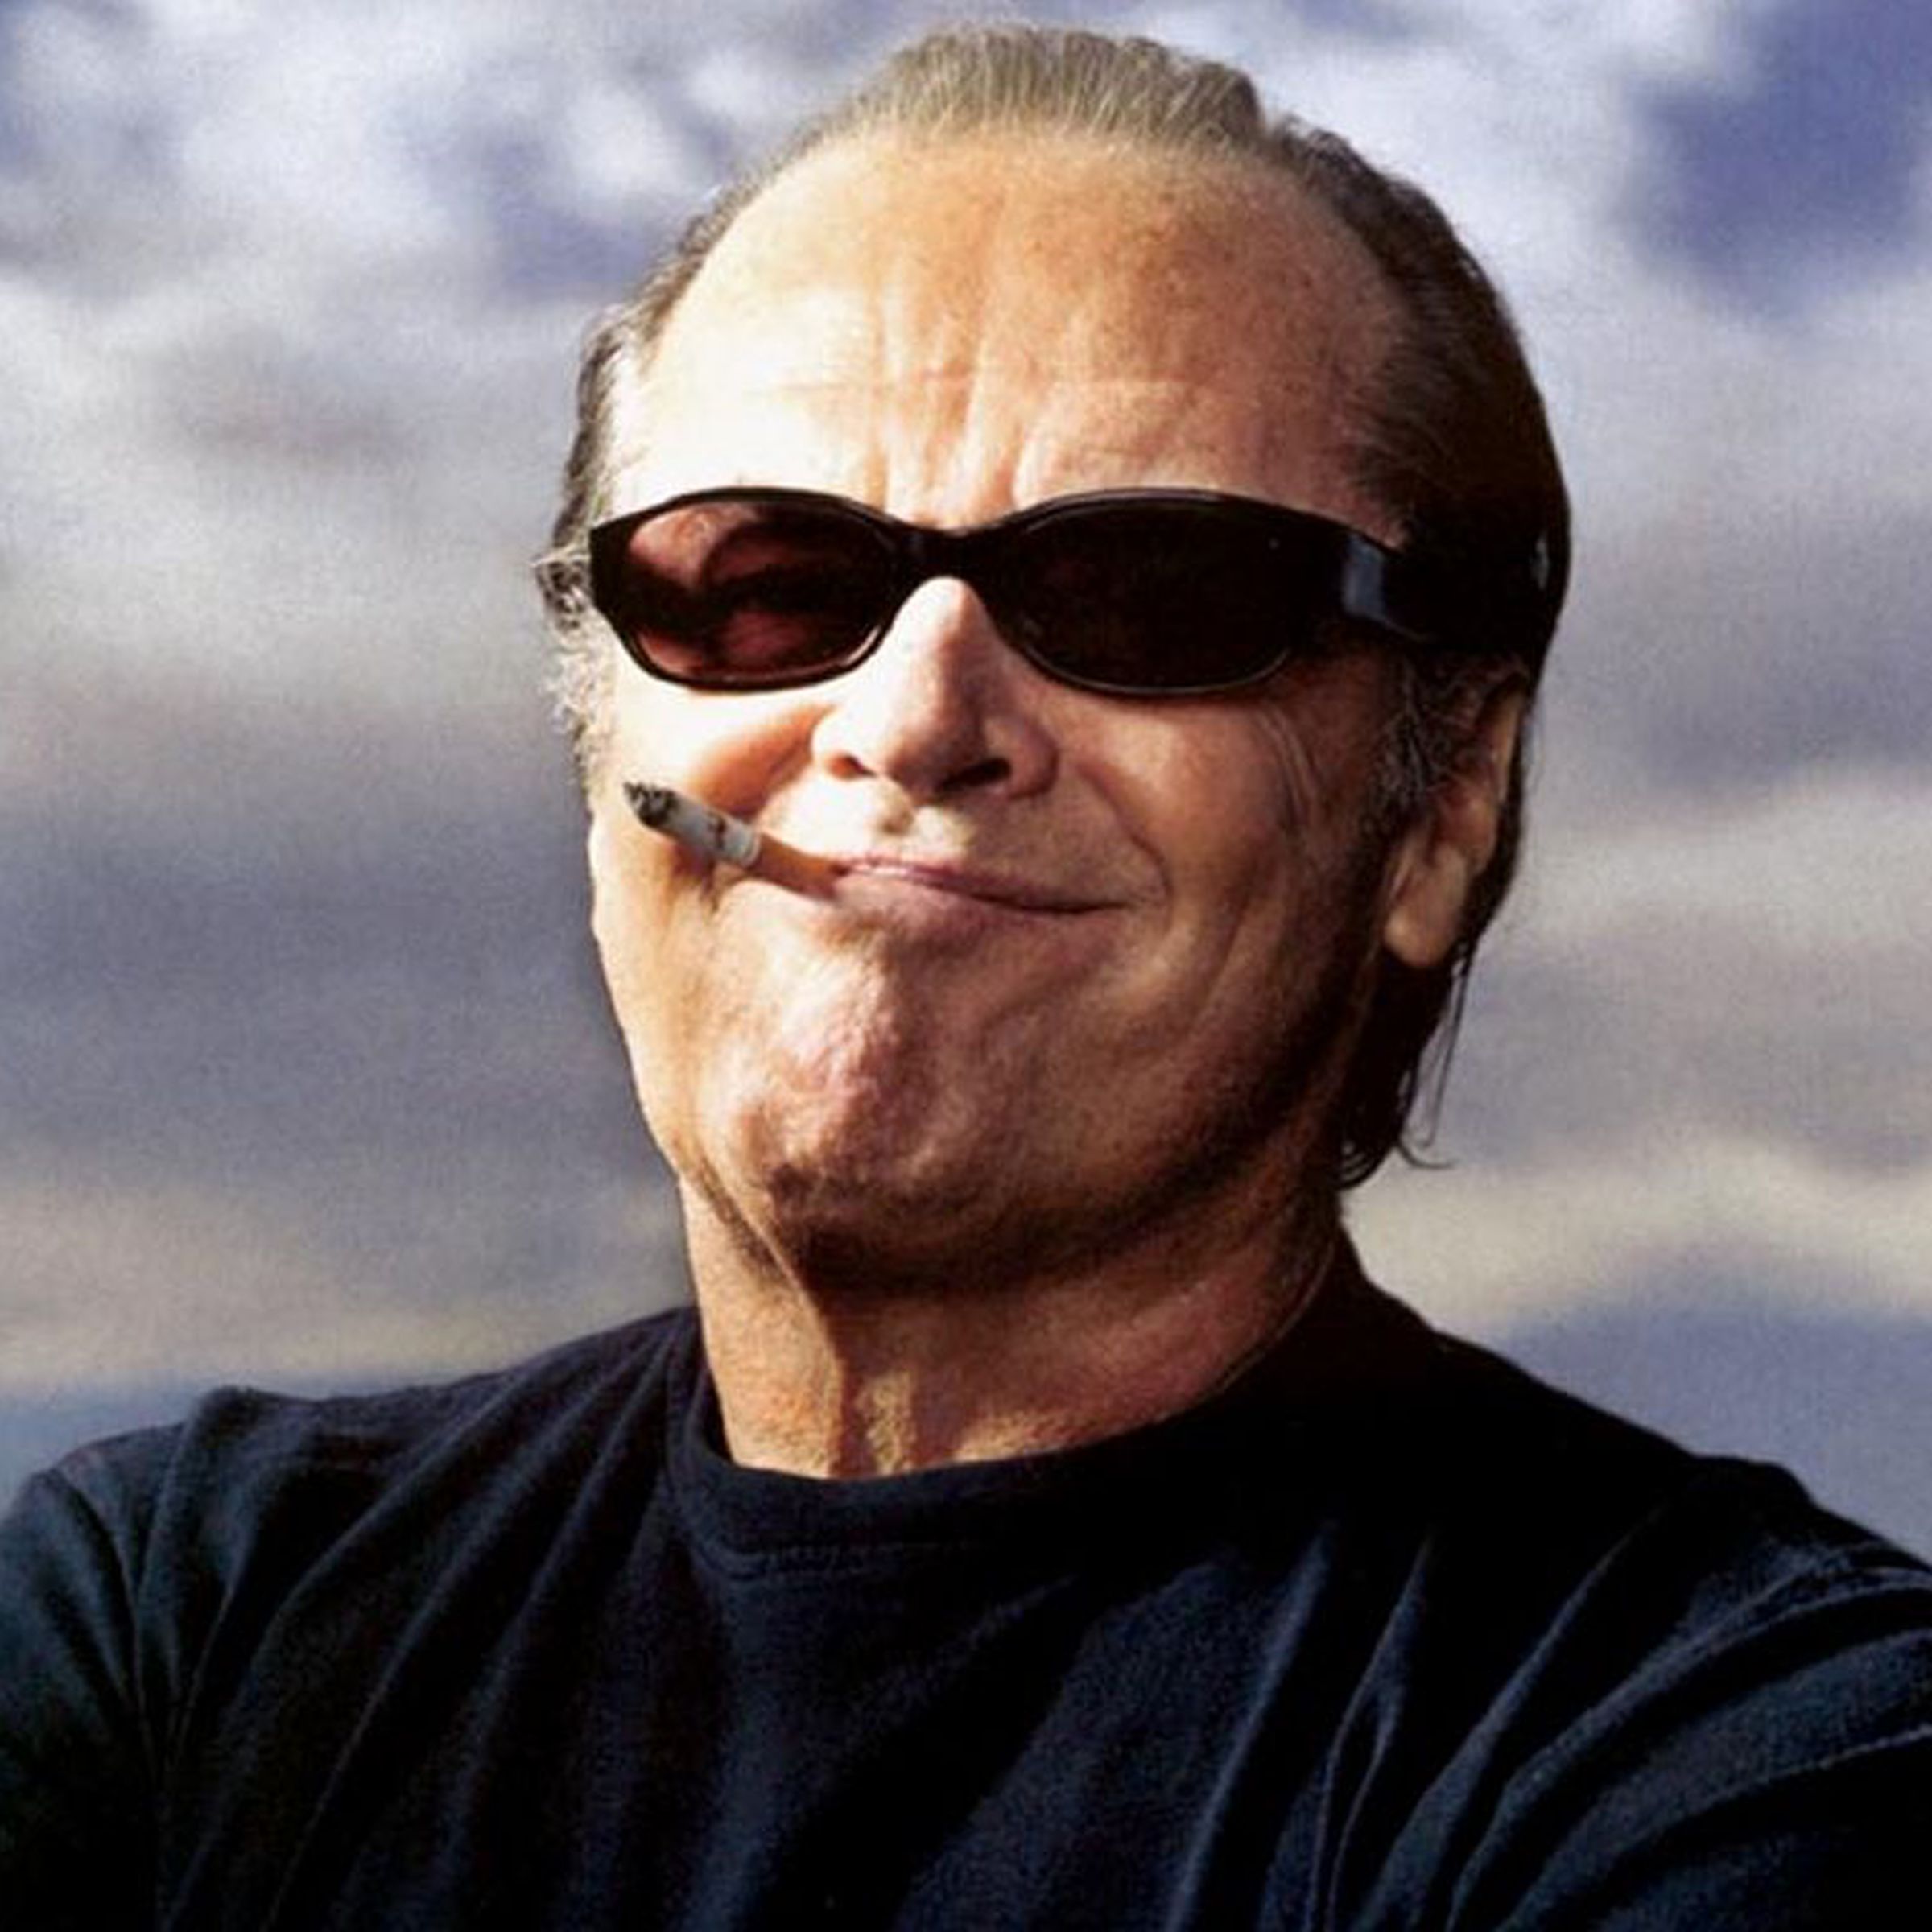 The unblurred version of @dril’s infamous Twitter avatar, a promotional photo of Jack Nicholson.